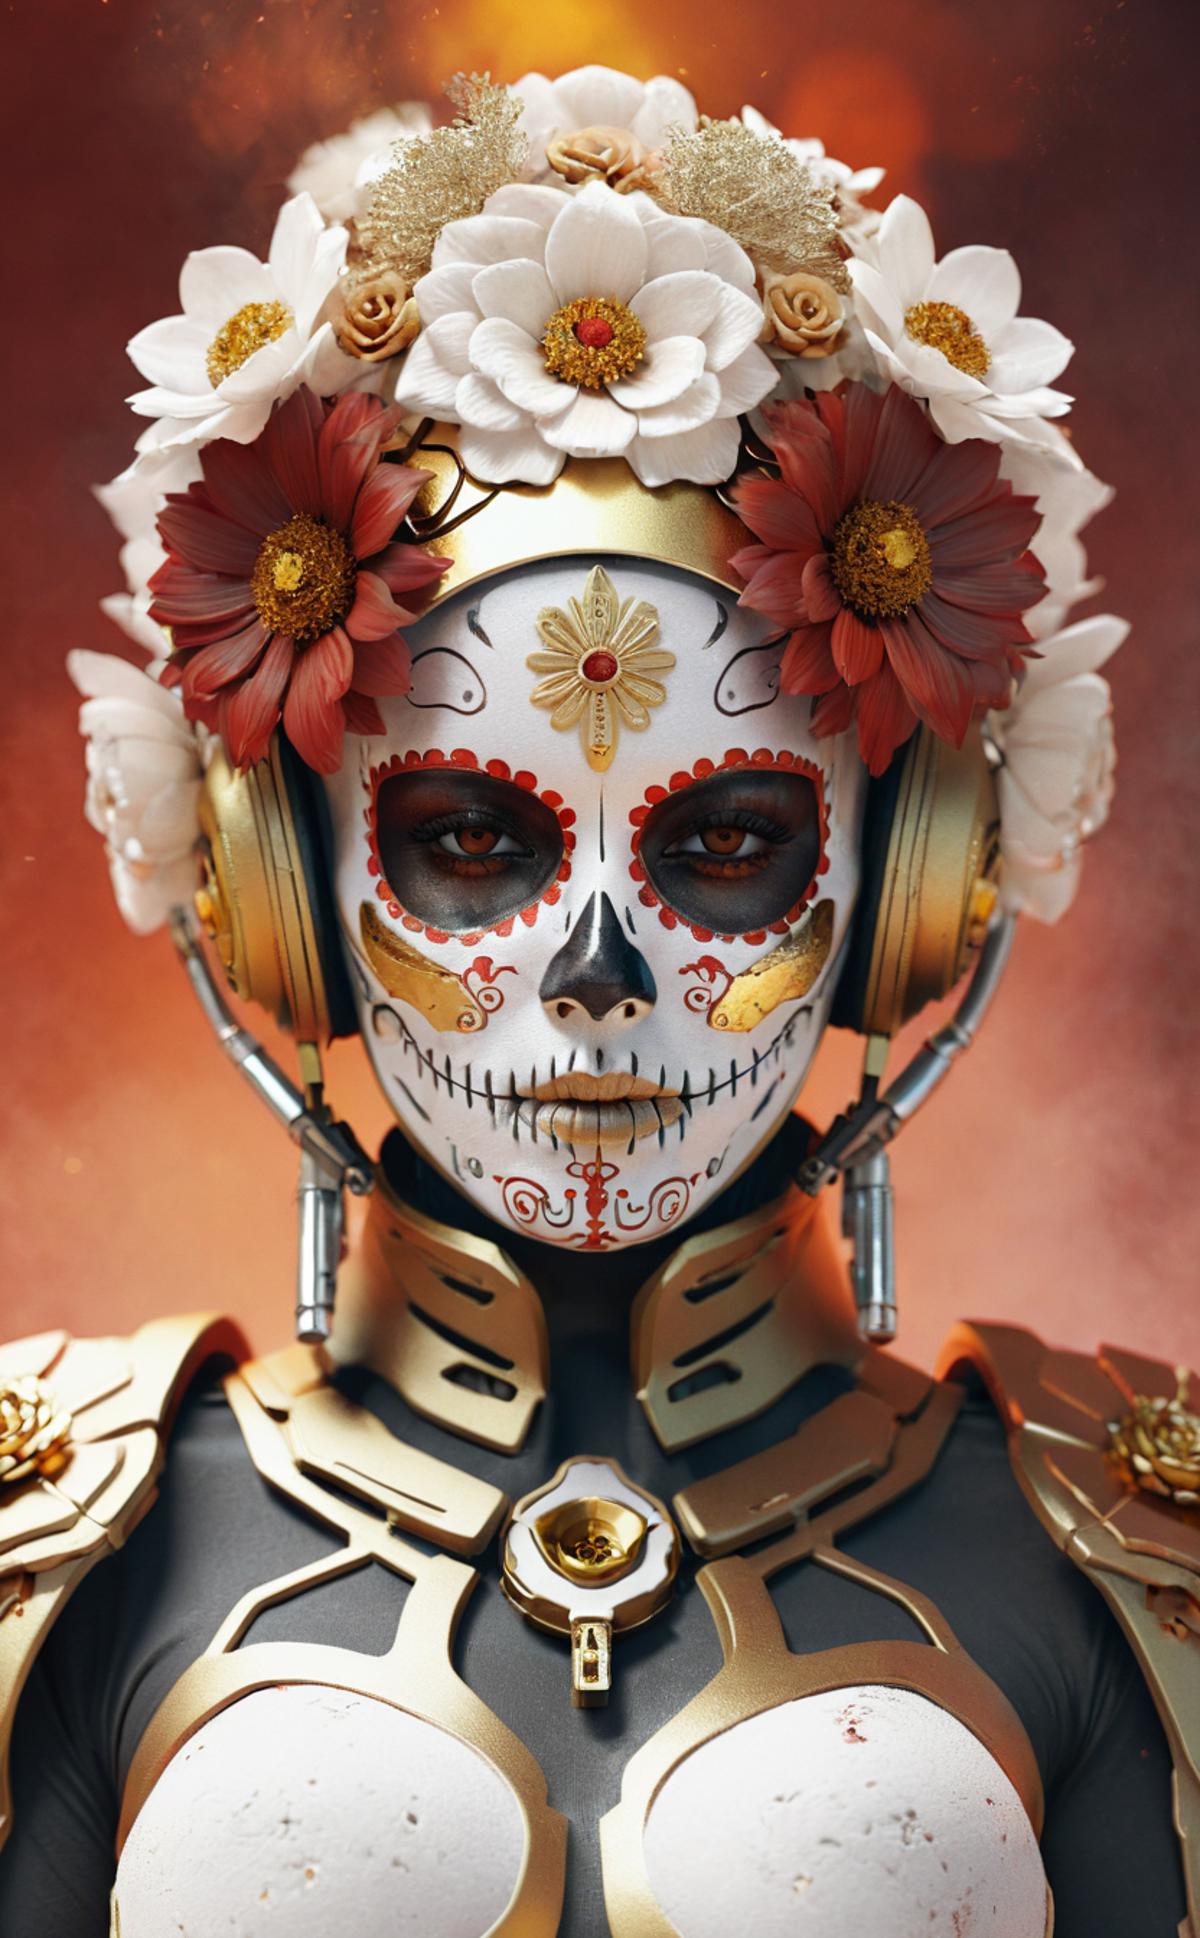 The image features a woman wearing a unique and elaborate skull headpiece, which is adorned with gold and red flowers. The headpiece is decorated with various elements such as a flower crown, gold and red flowers on her head, and possibly a skeleton mask. The woman is standing in front of a colorful background, which complements the vivid and intricate design of her headpiece.